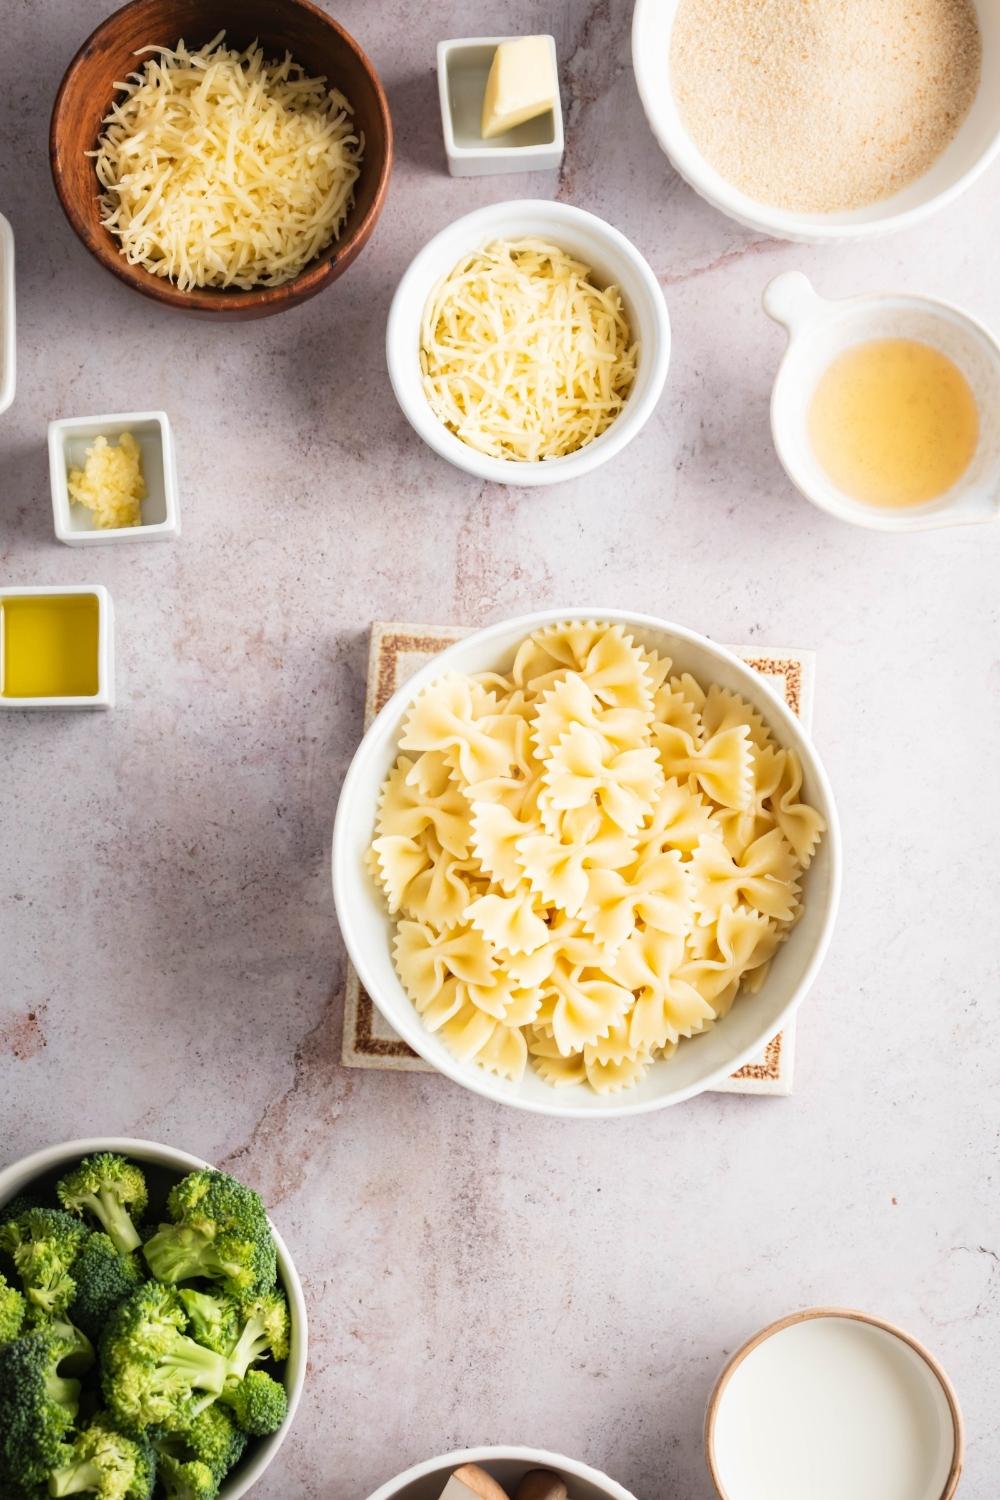 Bow tie pasta in a bowl surrounded by a bowl of parmesan cheese, a bowl of asiago cheese, a bowl of broccoli, and a bowl of bread crumbs.